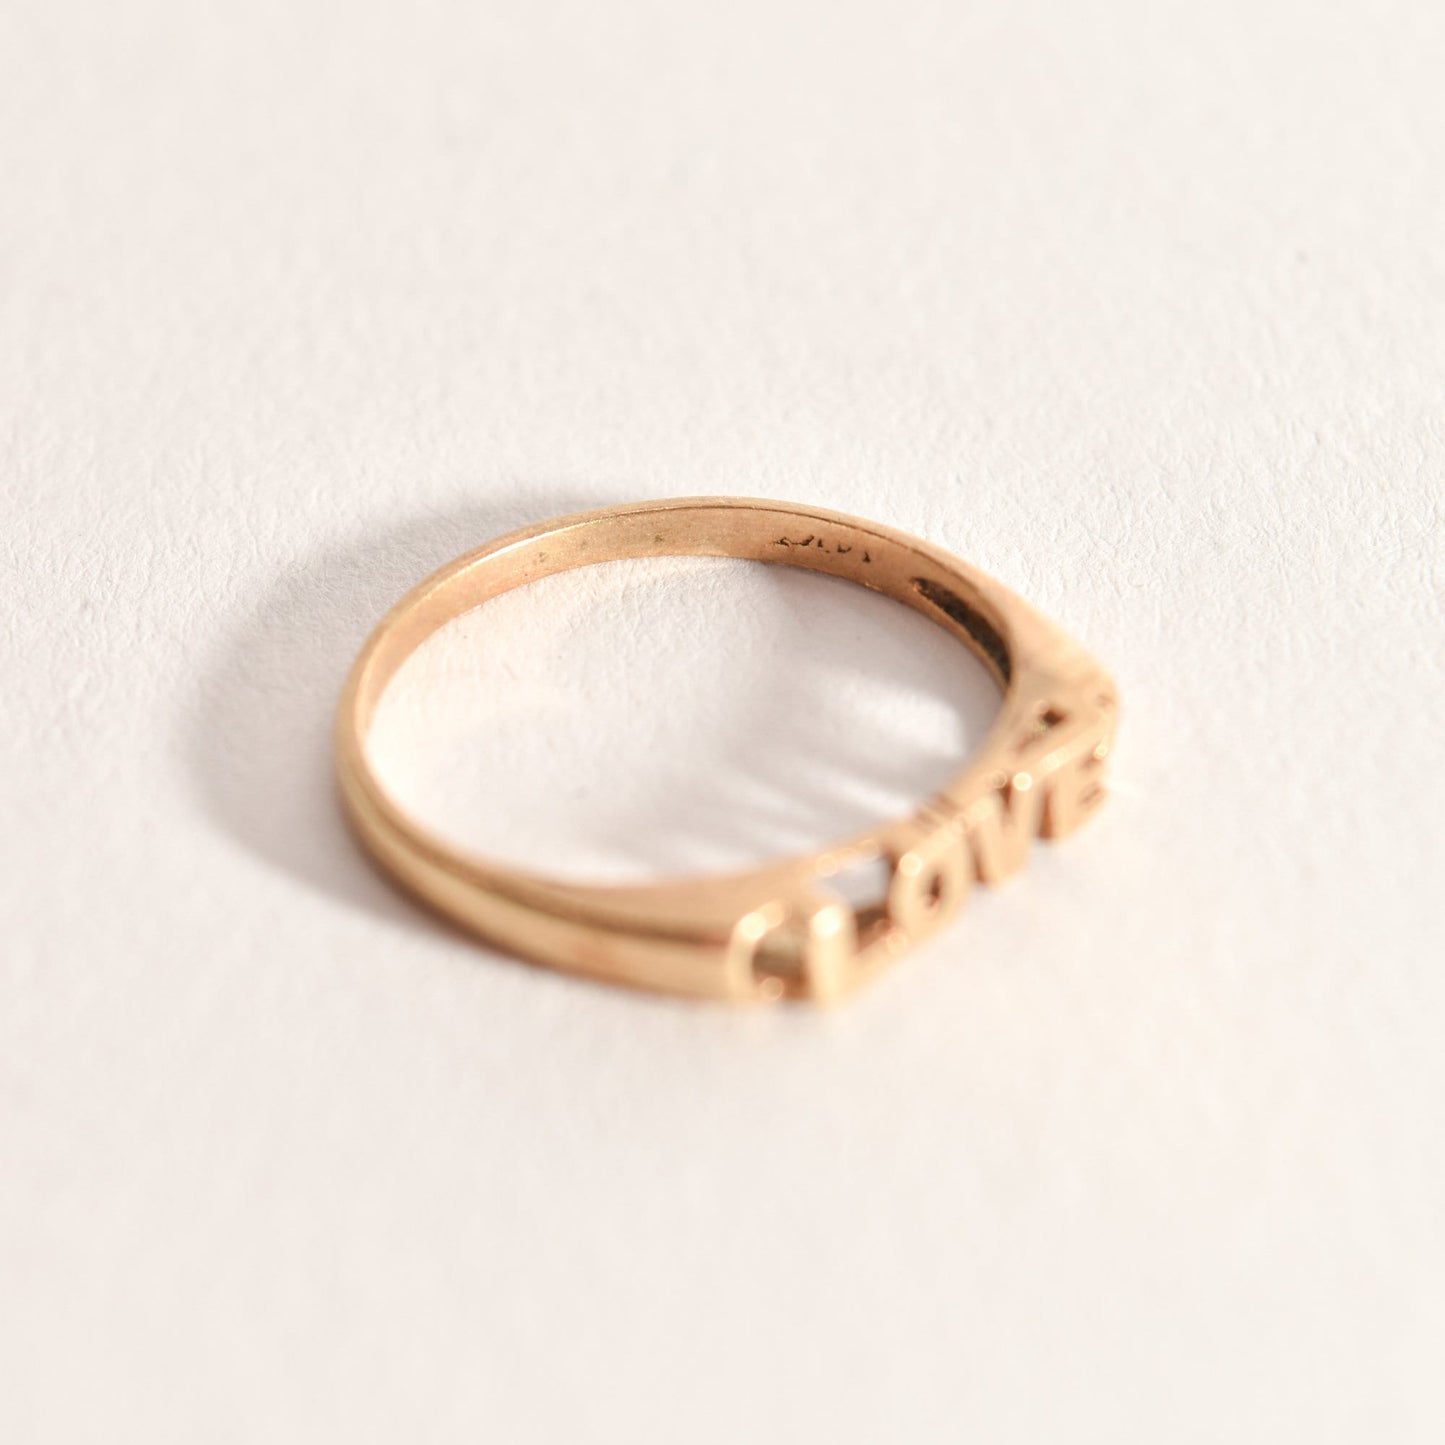 14K yellow gold minimalist 'LOVE' ring, cute gold stacking ring for Valentine's Day gift, size 6.75 US displayed on a clean white background.